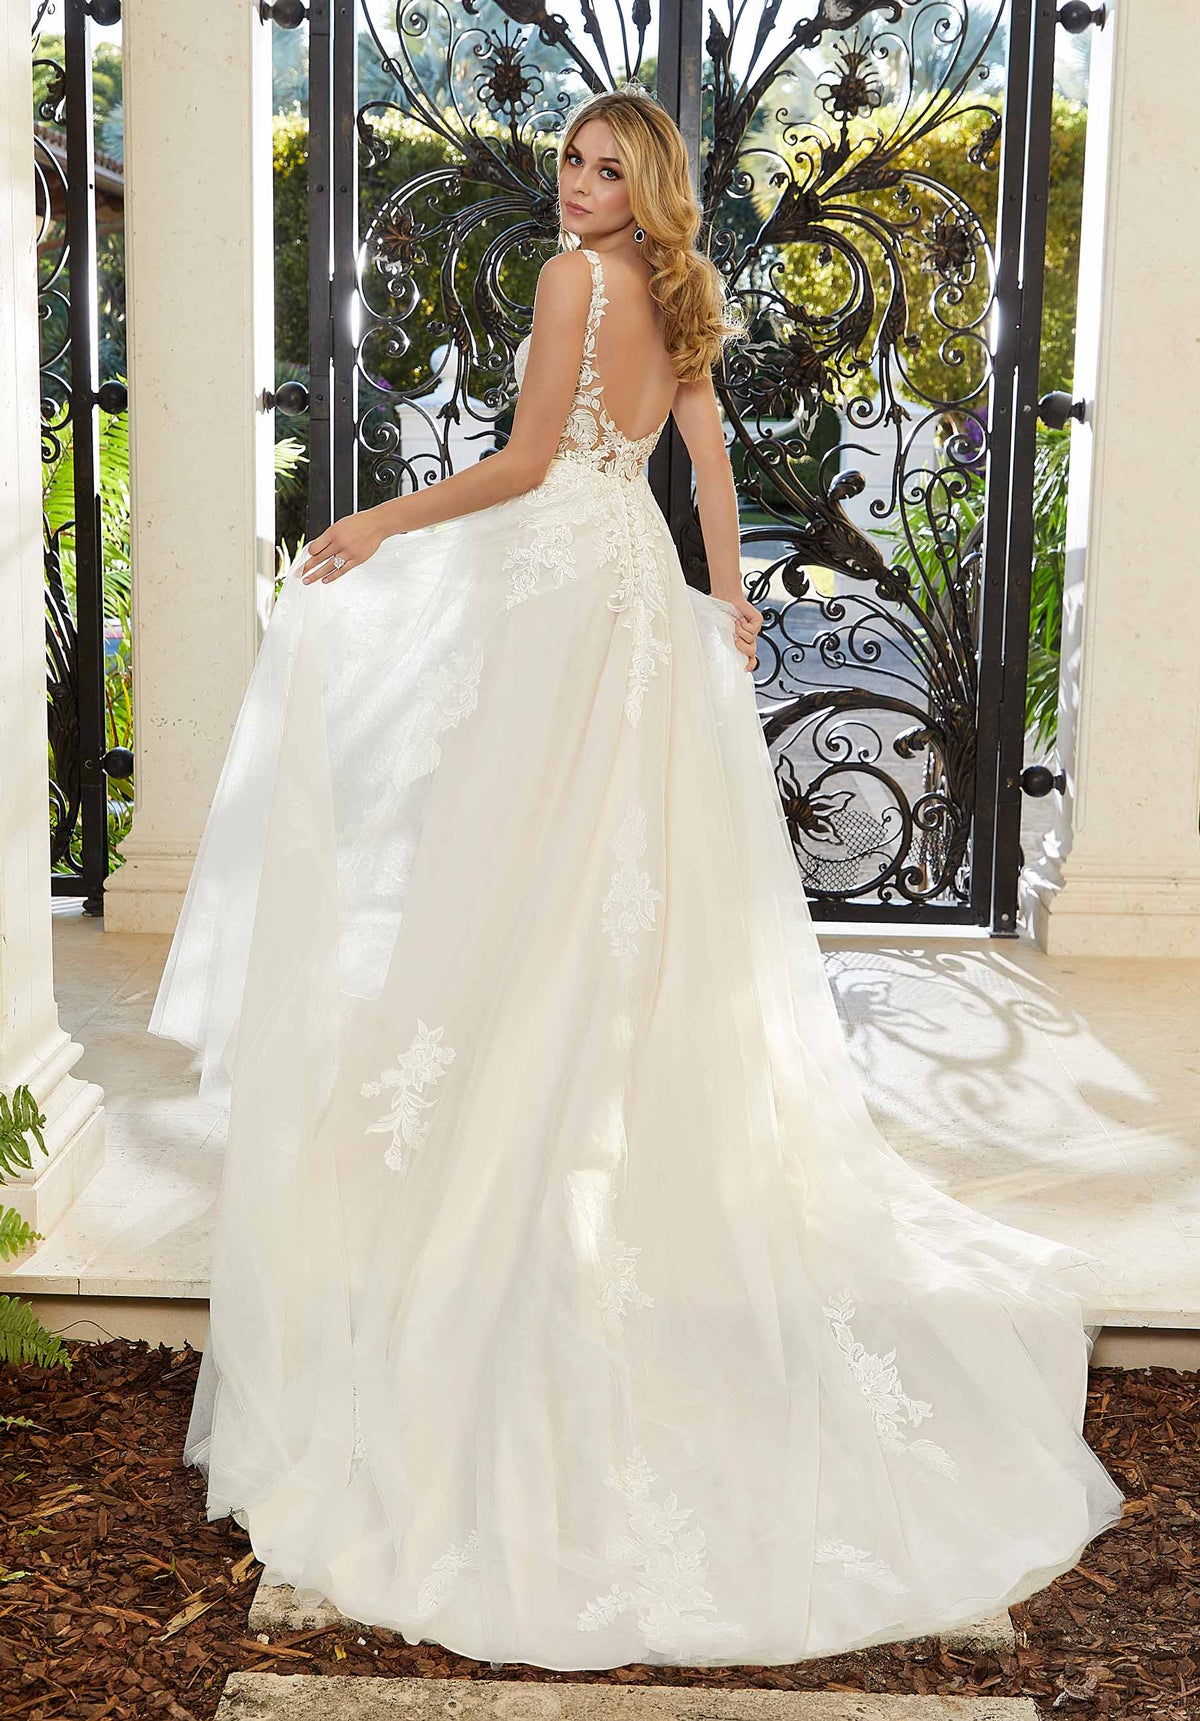 Blu - 5974 - Fortuna - Cheron's Bridal, Wedding Gown - Morilee Blu - - Wedding Gowns Dresses Chattanooga Hixson Shops Boutiques Tennessee TN Georgia GA MSRP Lowest Prices Sale Discount